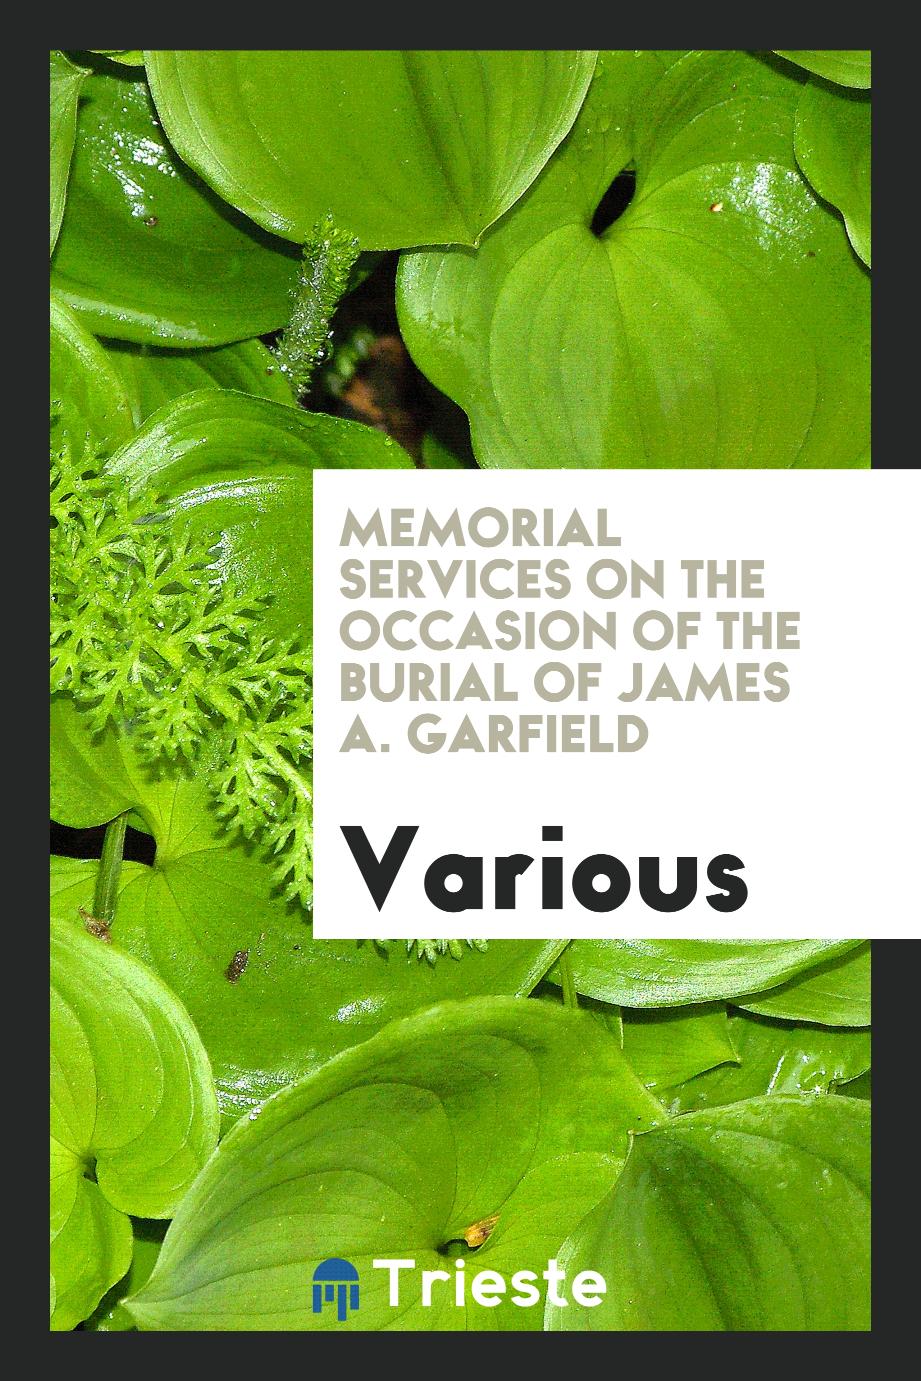 Memorial services on the occasion of the burial of James A. Garfield